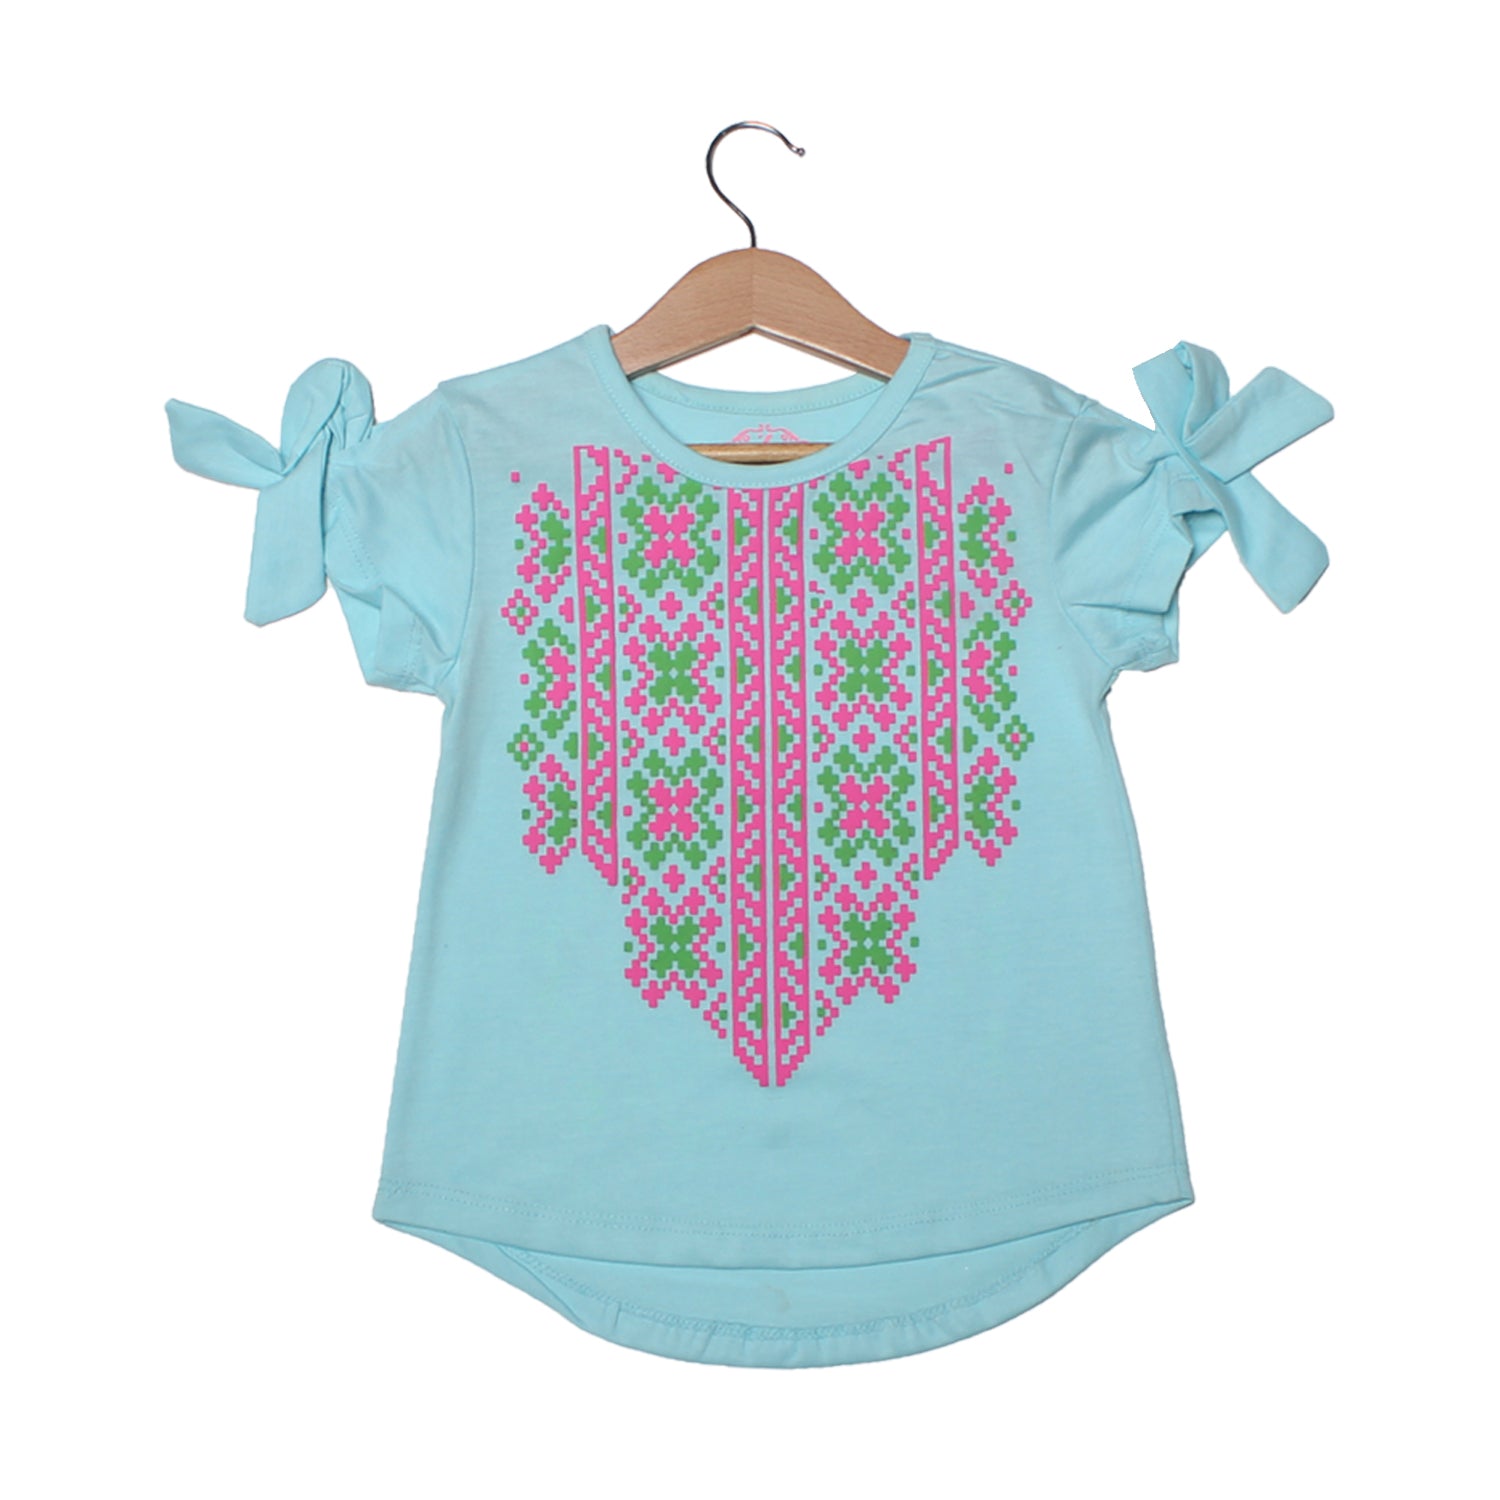 NEW SKY BLUE DESIGN PRINTED T-SHIRT TOP FOR GIRLS